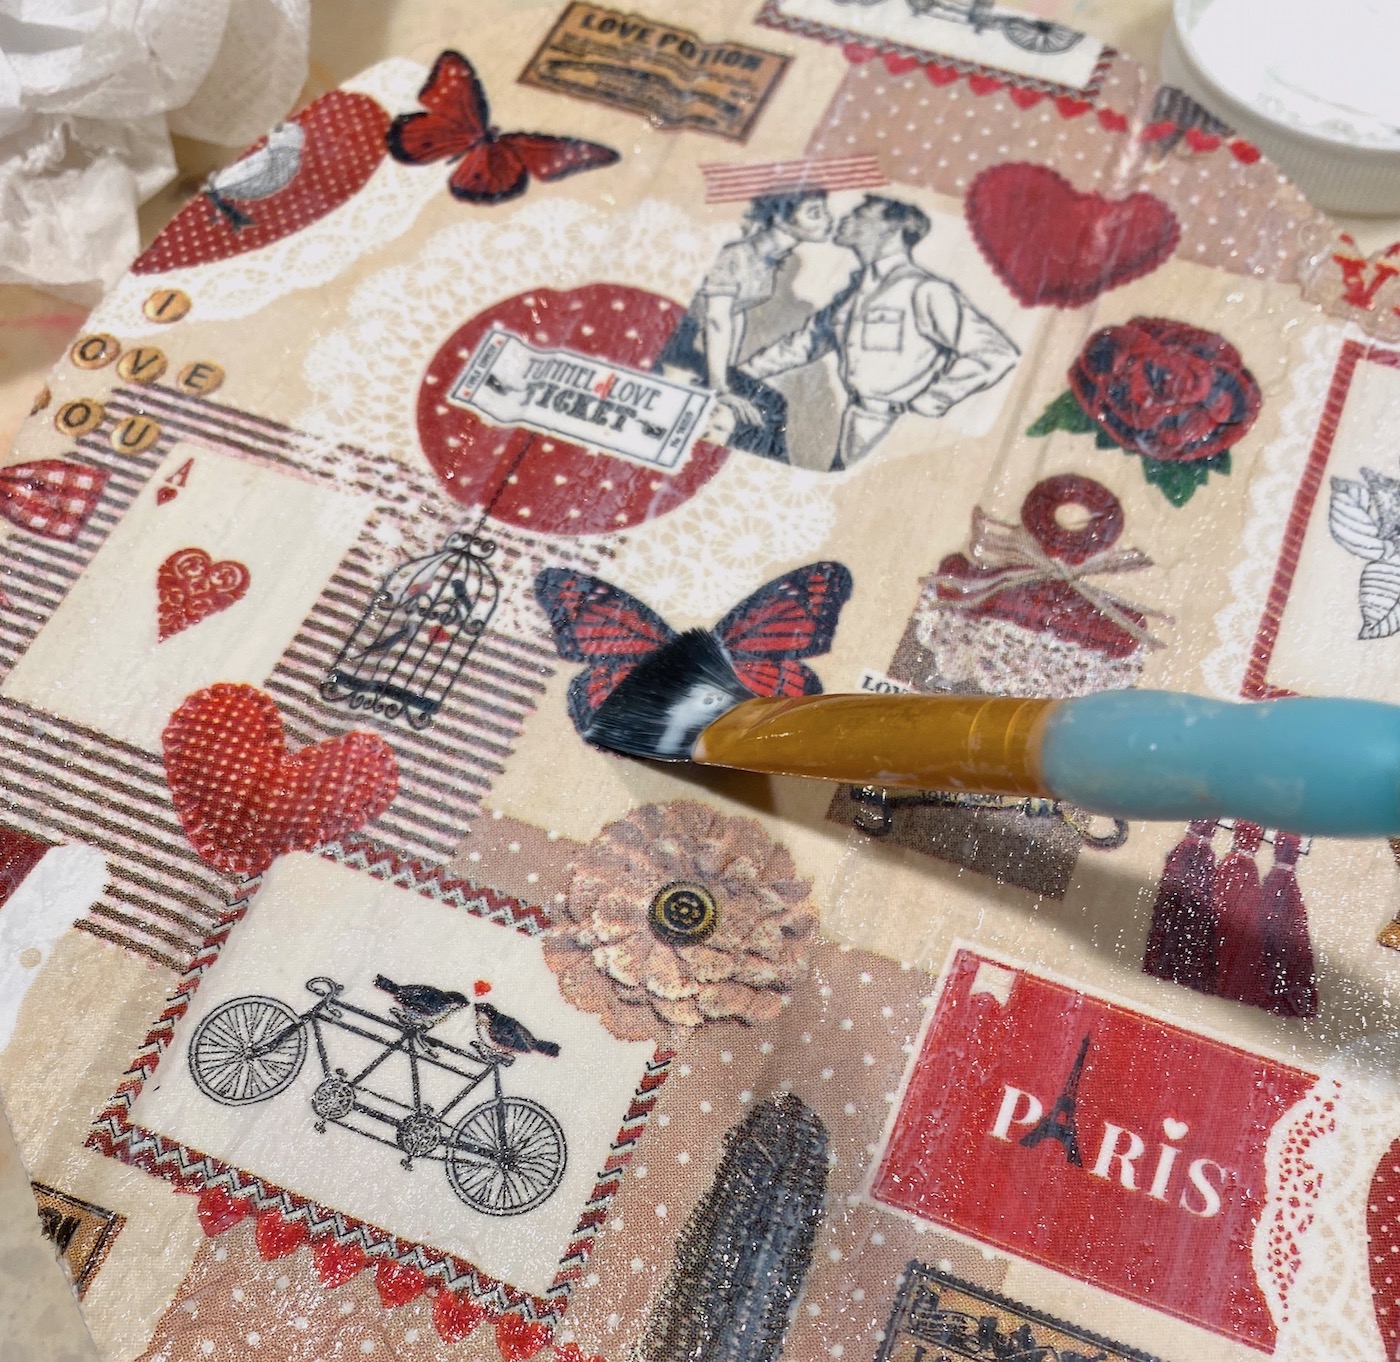 Applying Mod Podge to the top of the napkin